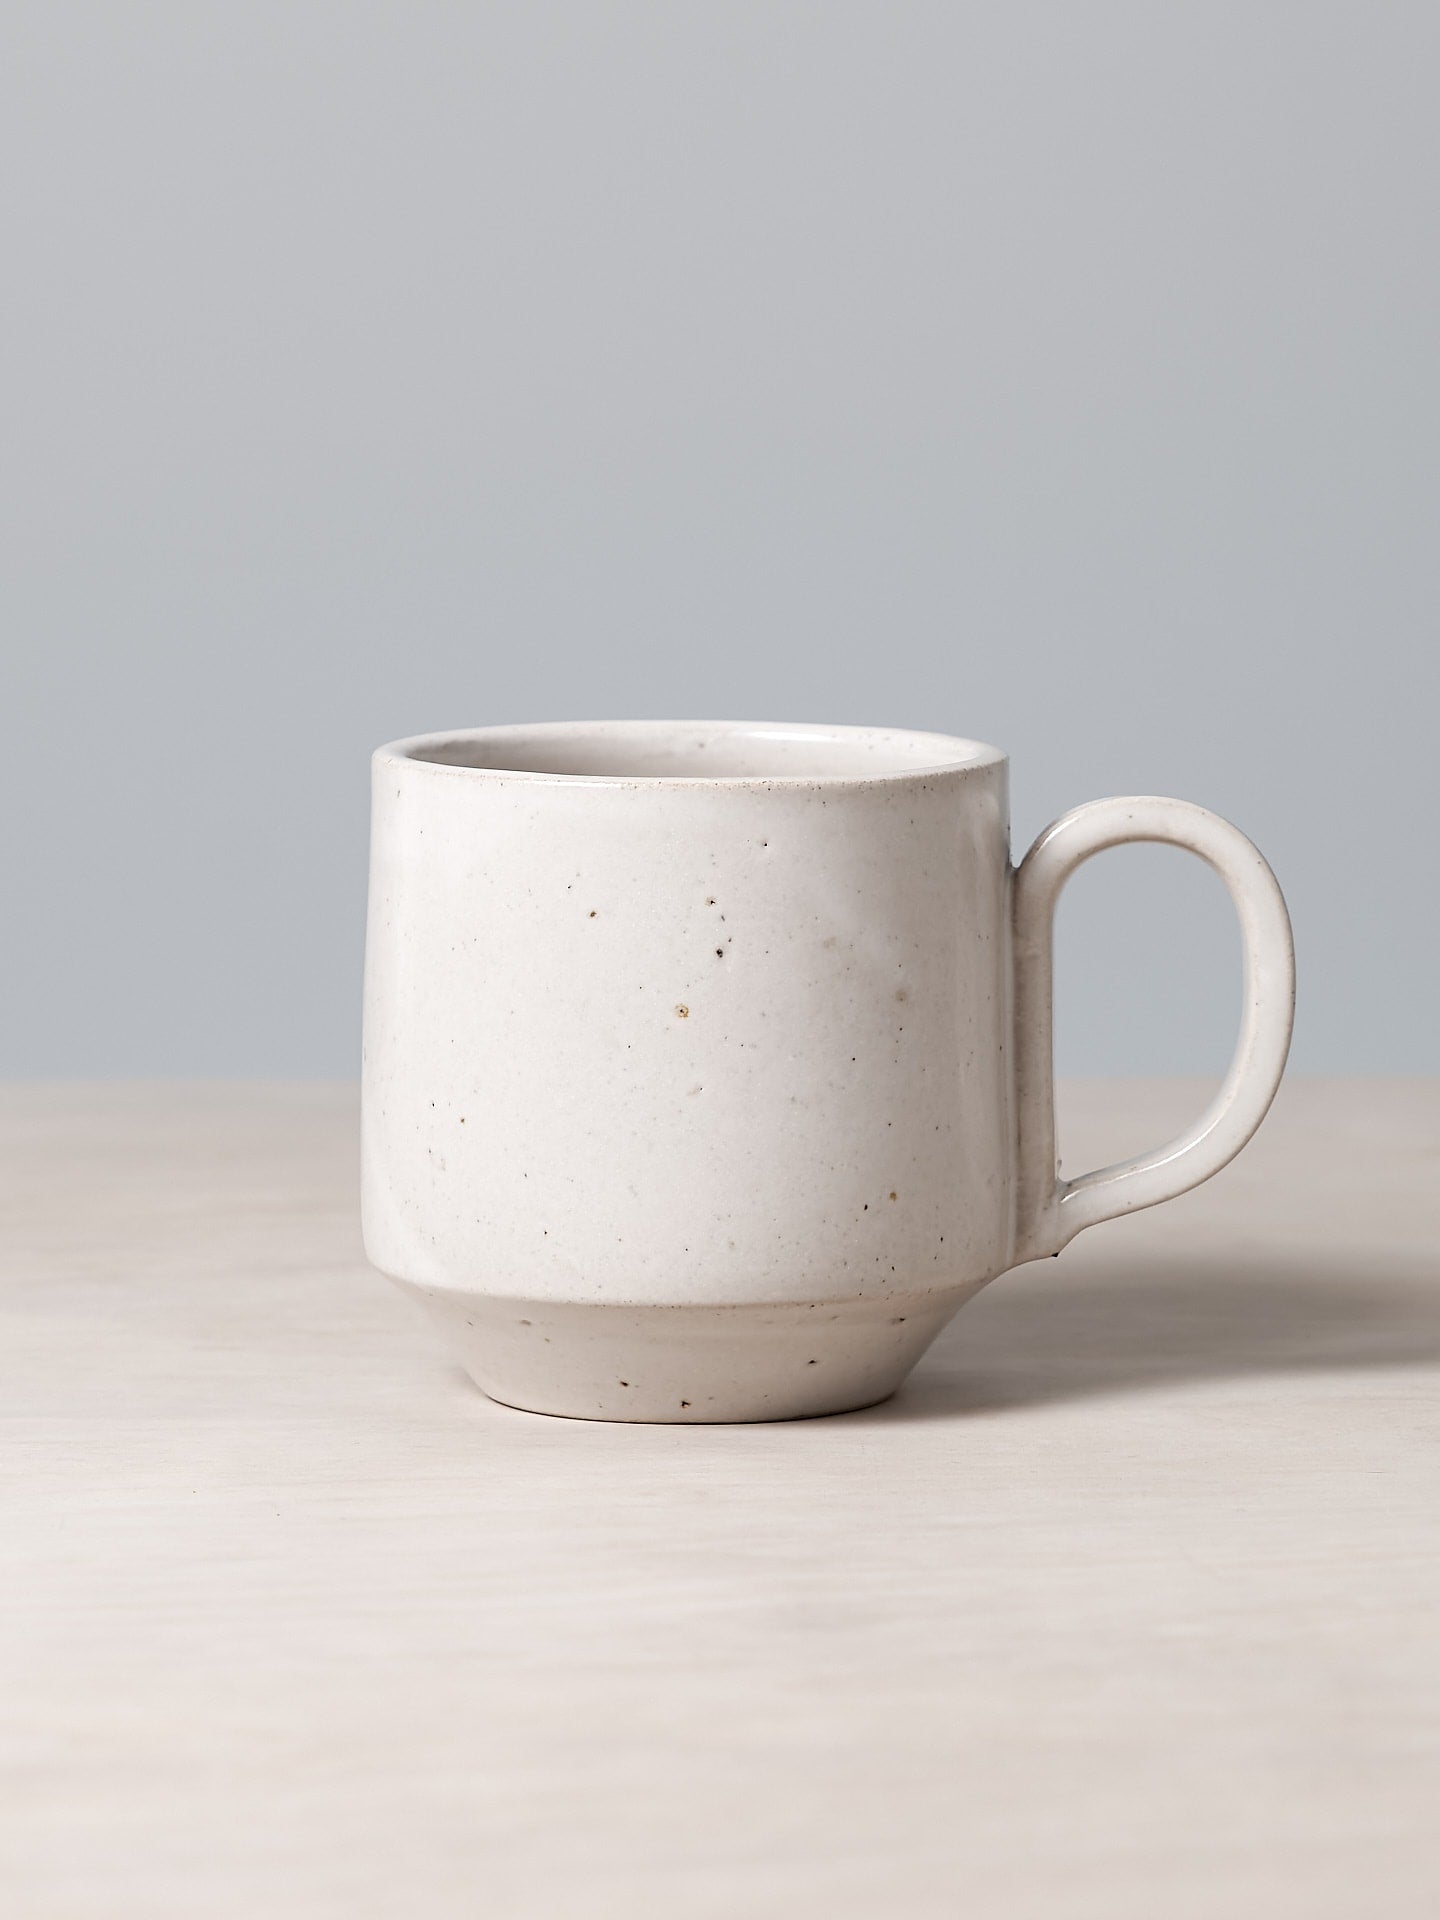 A Large Stacking Mug – White sitting on top of a wooden table, Richard Beauchamp.